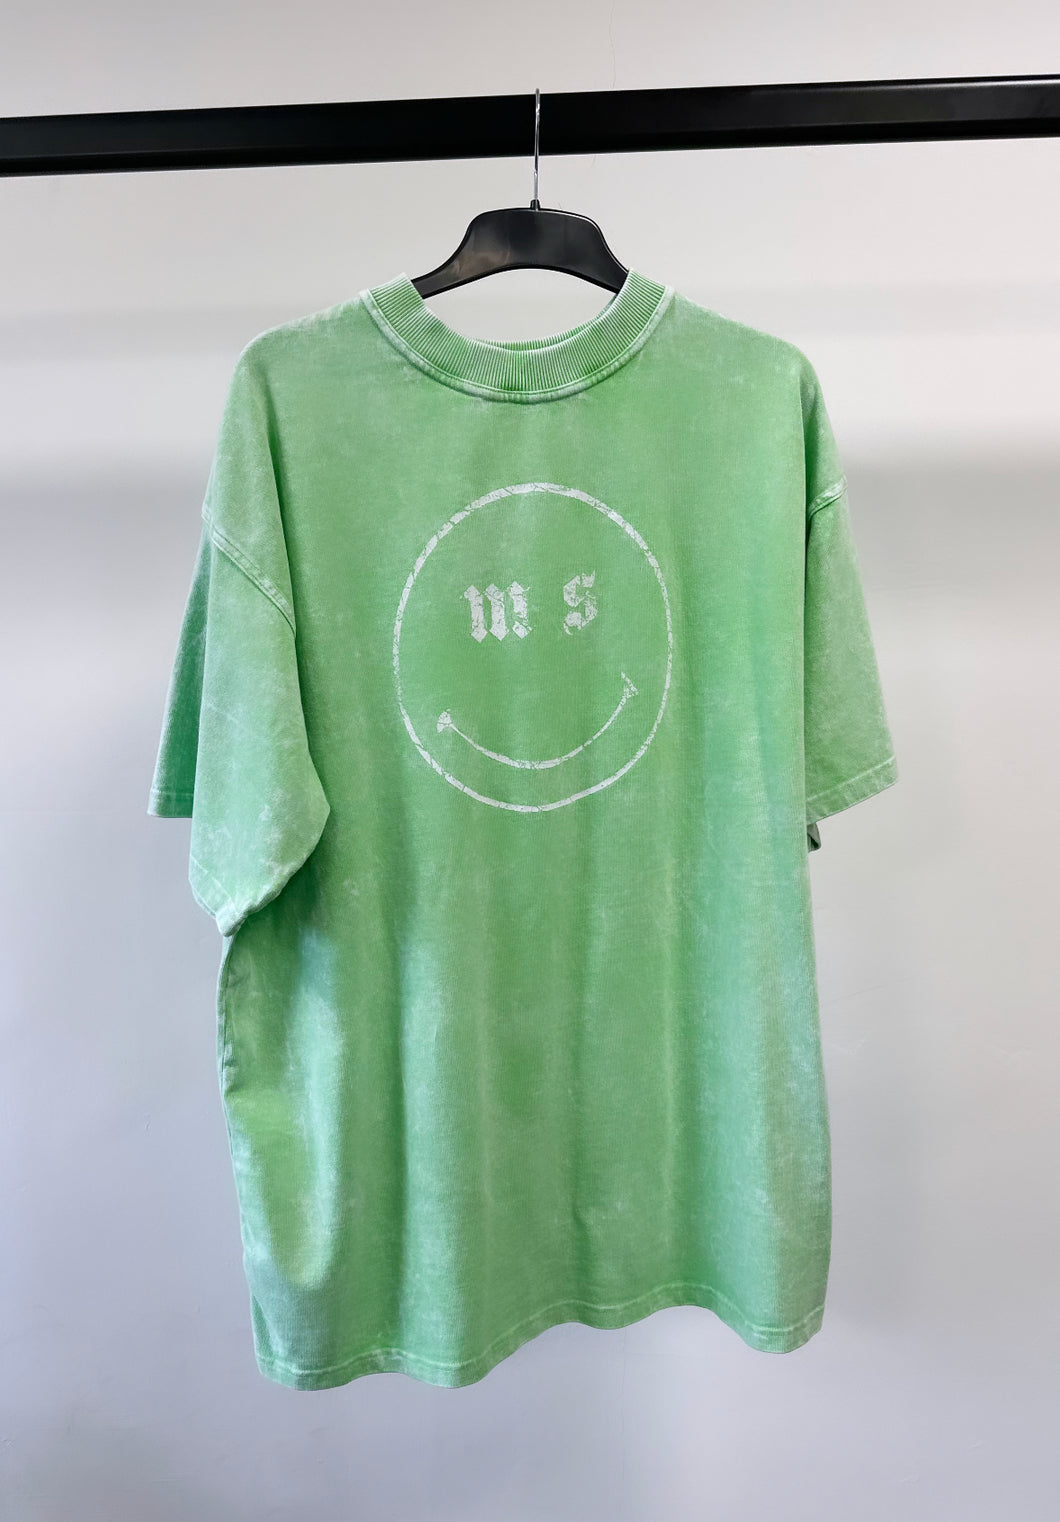 Washed Apple Green Smiley Heavyweight T-shirt.